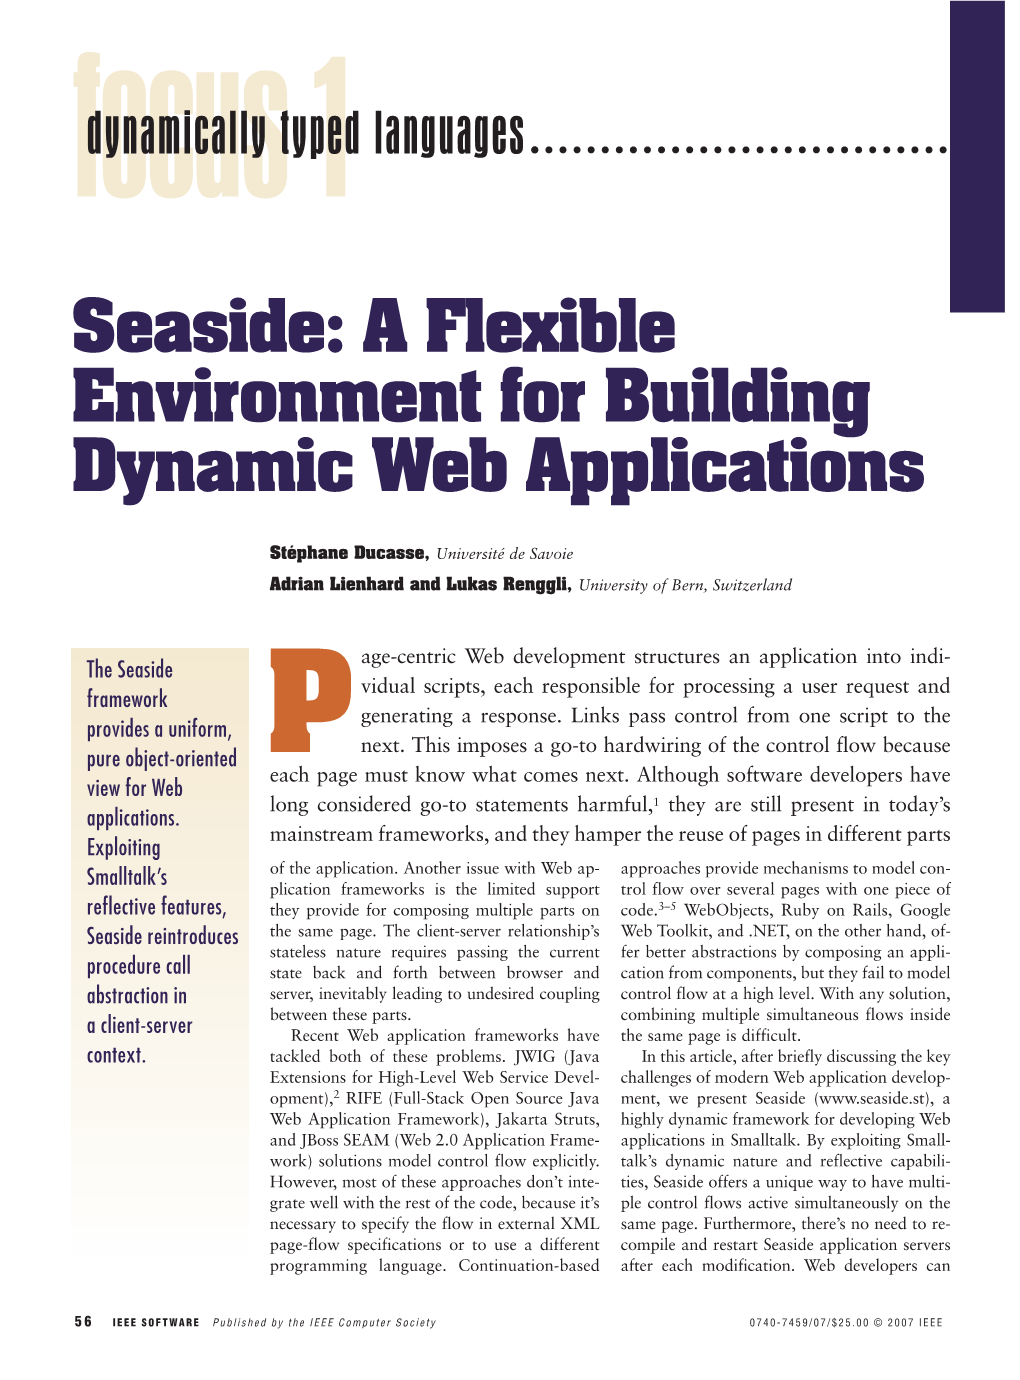 Seaside: a Flexible Environment for Building Dynamic Web Applications